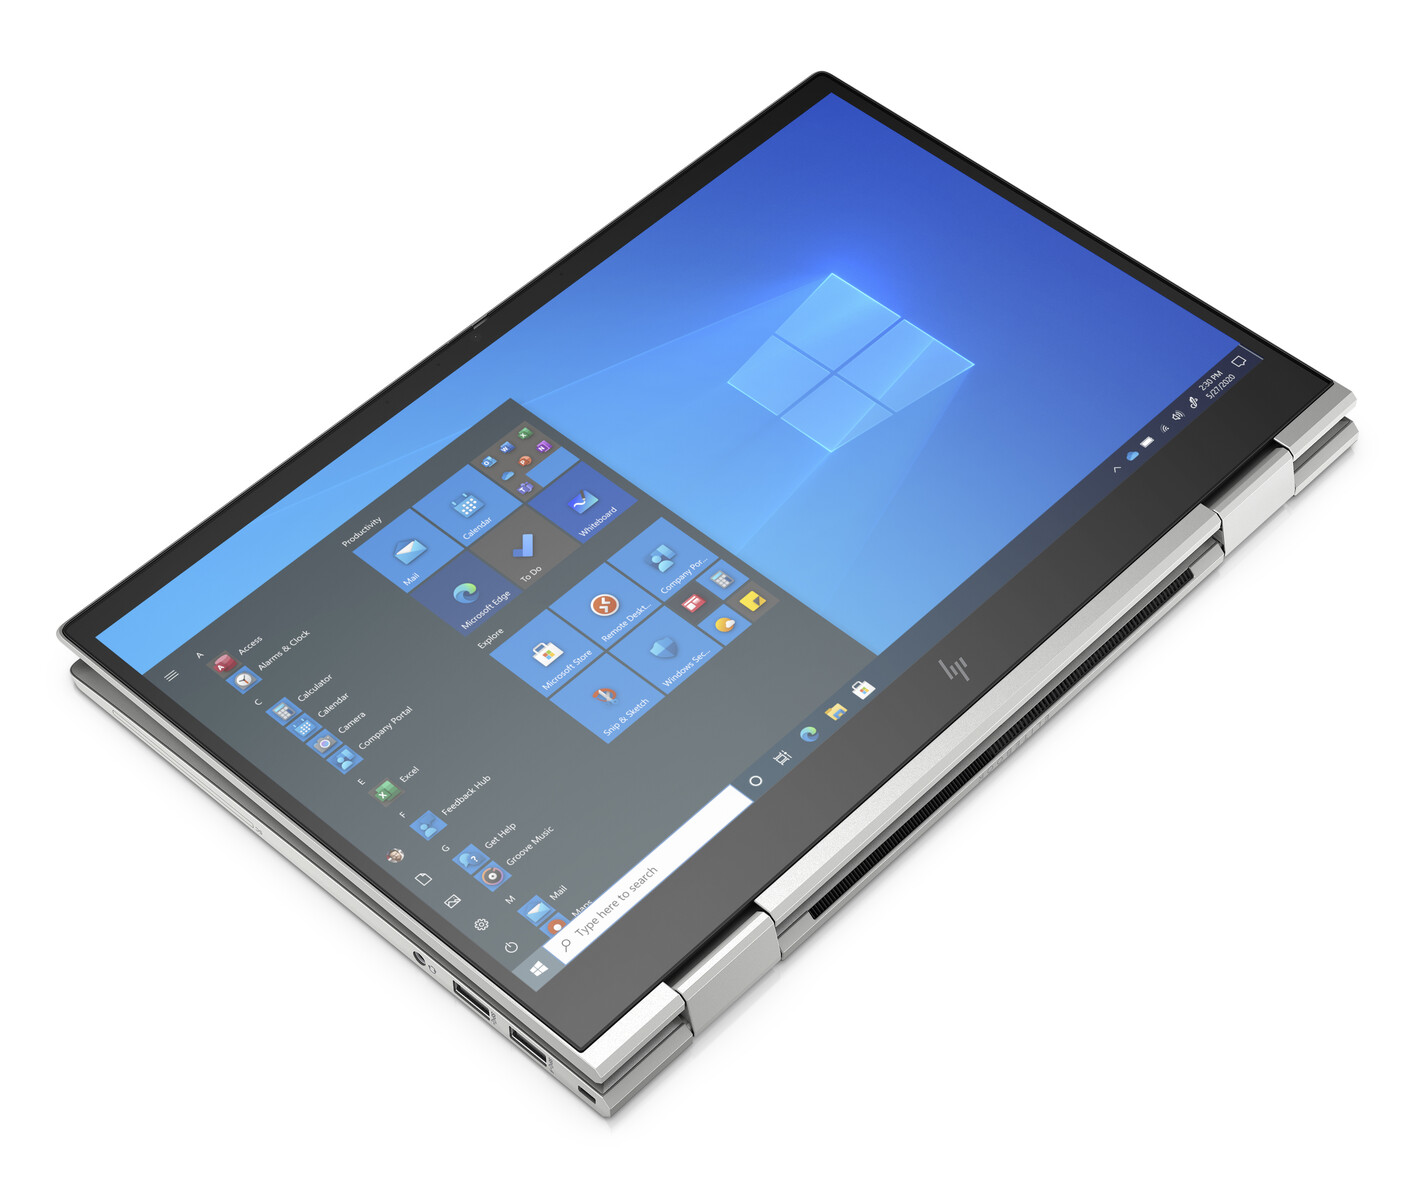 HP EliteBook x360 830 G8 gets the Intel Tiger Lake treatment and optional 5G connectivity